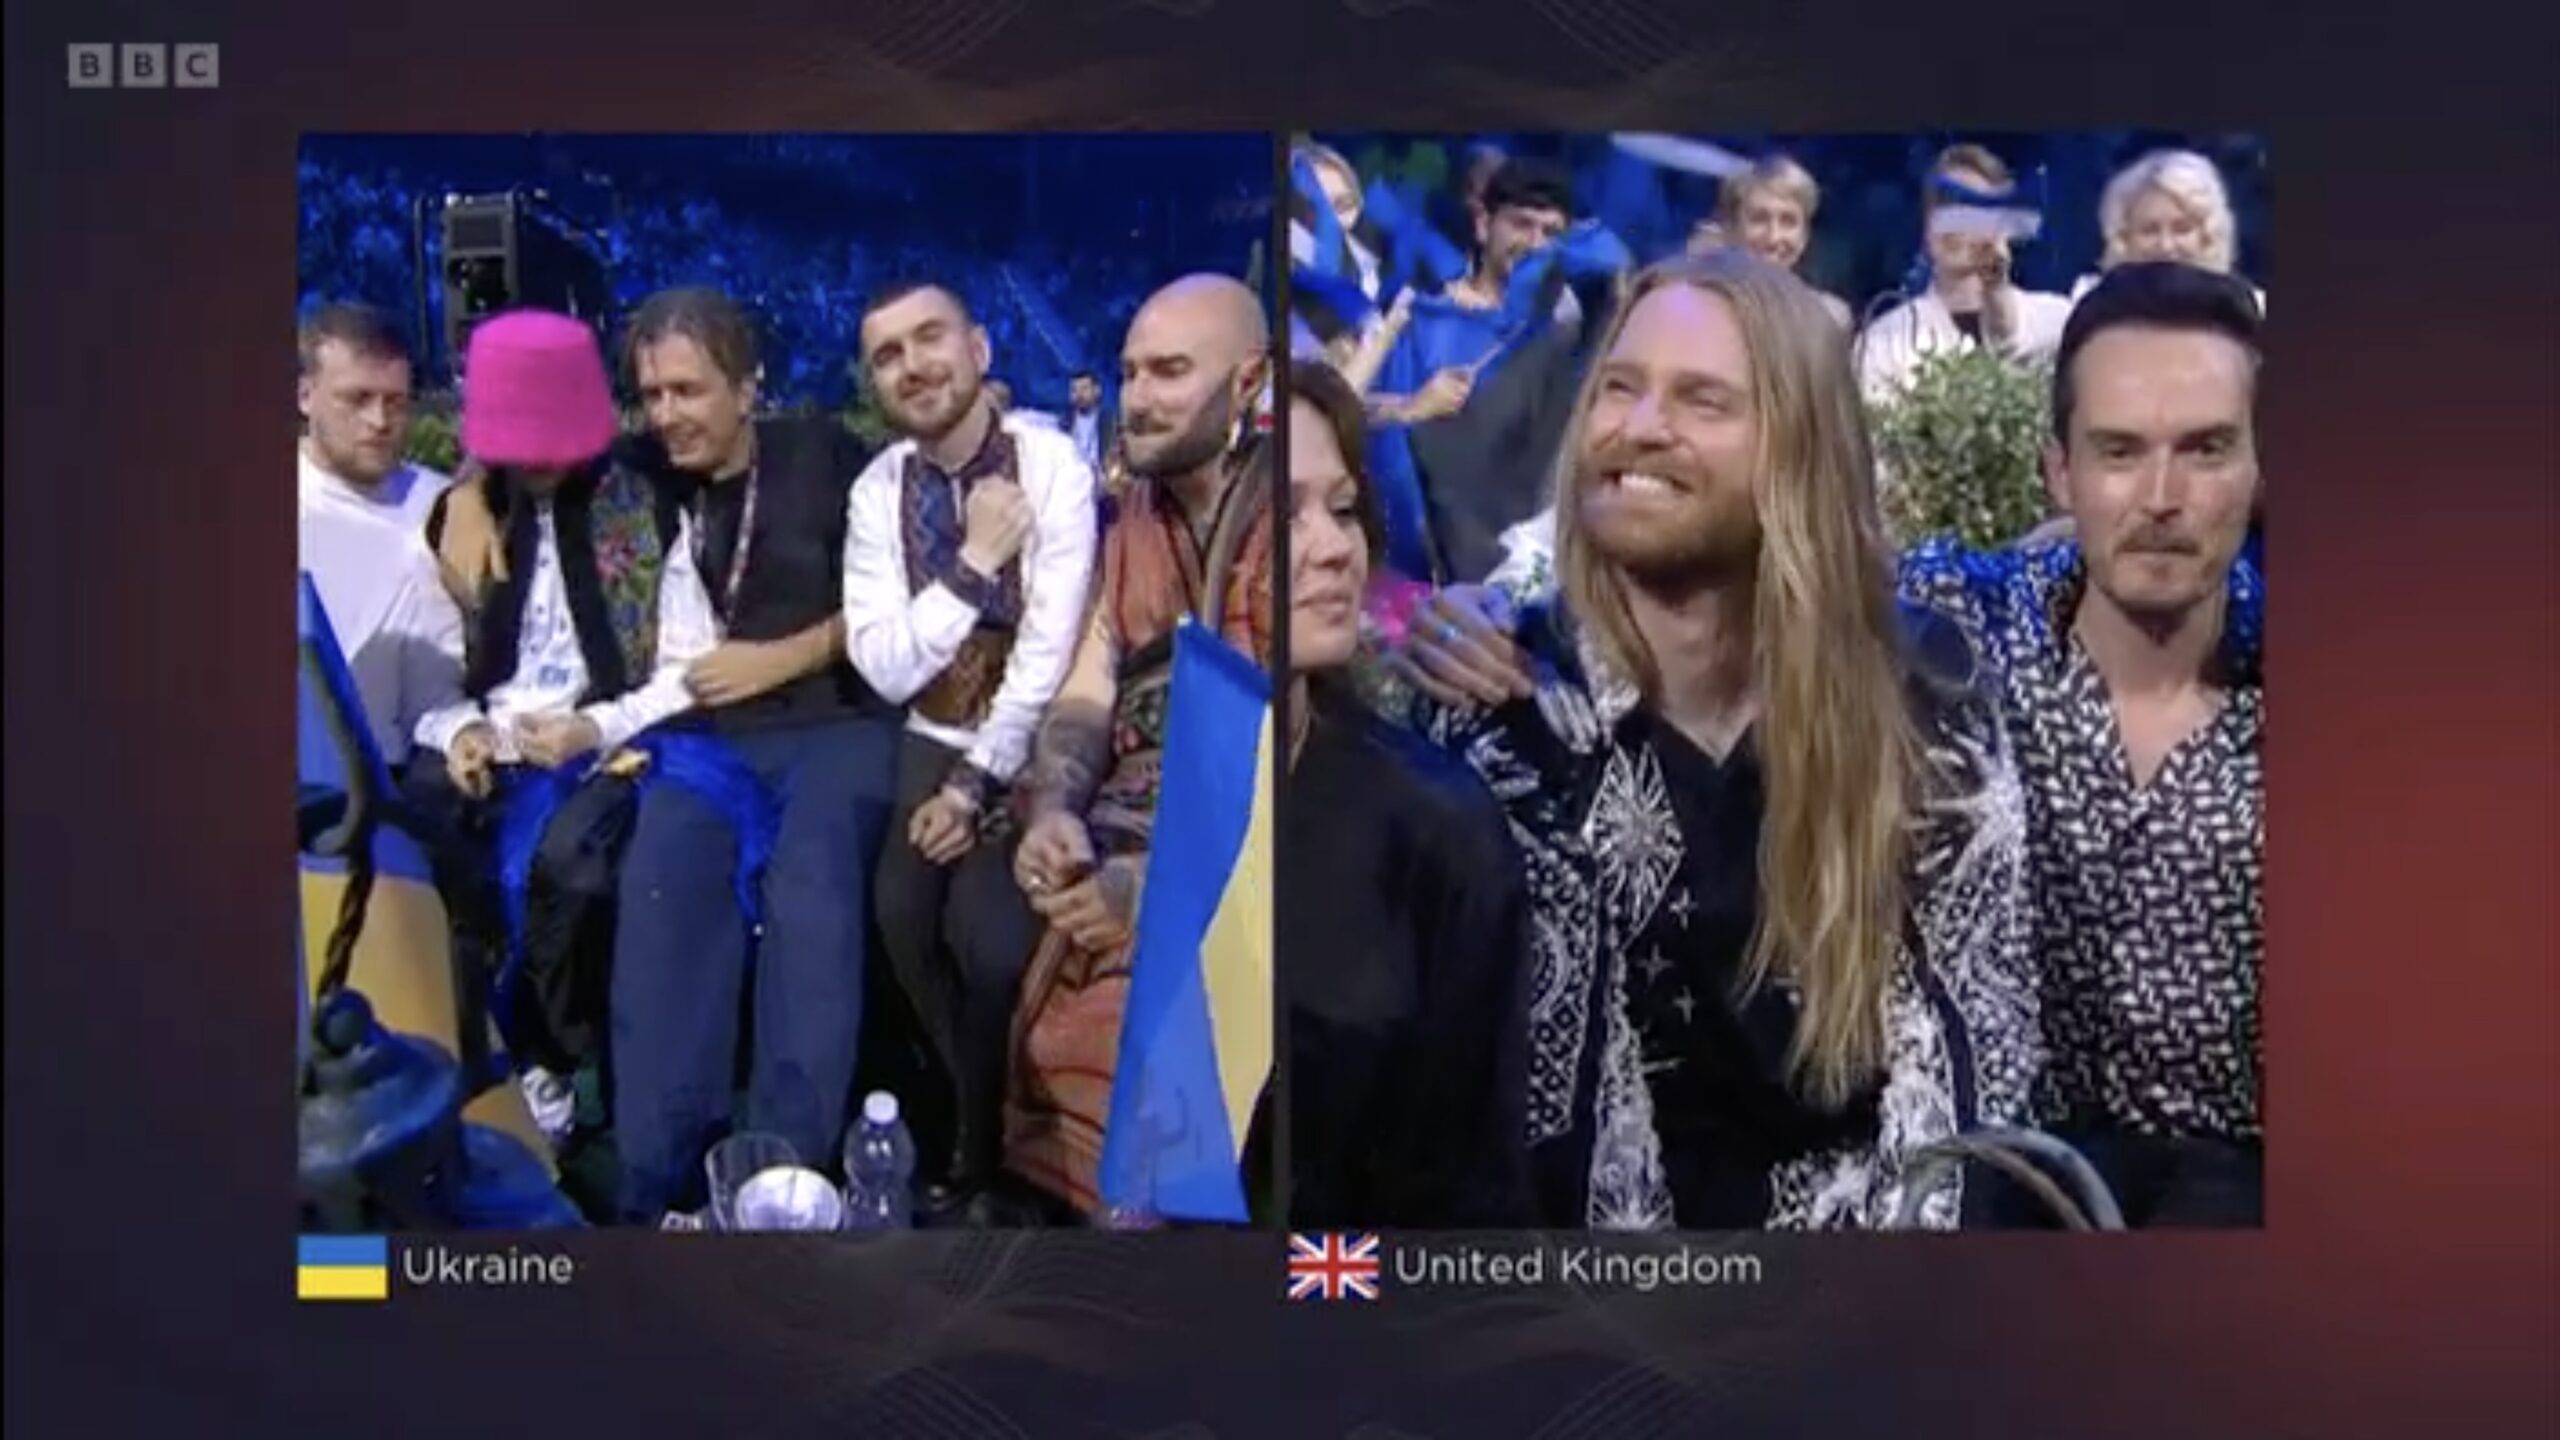 Eurovision 2022 results United Kingdom finish second place as Ukraine